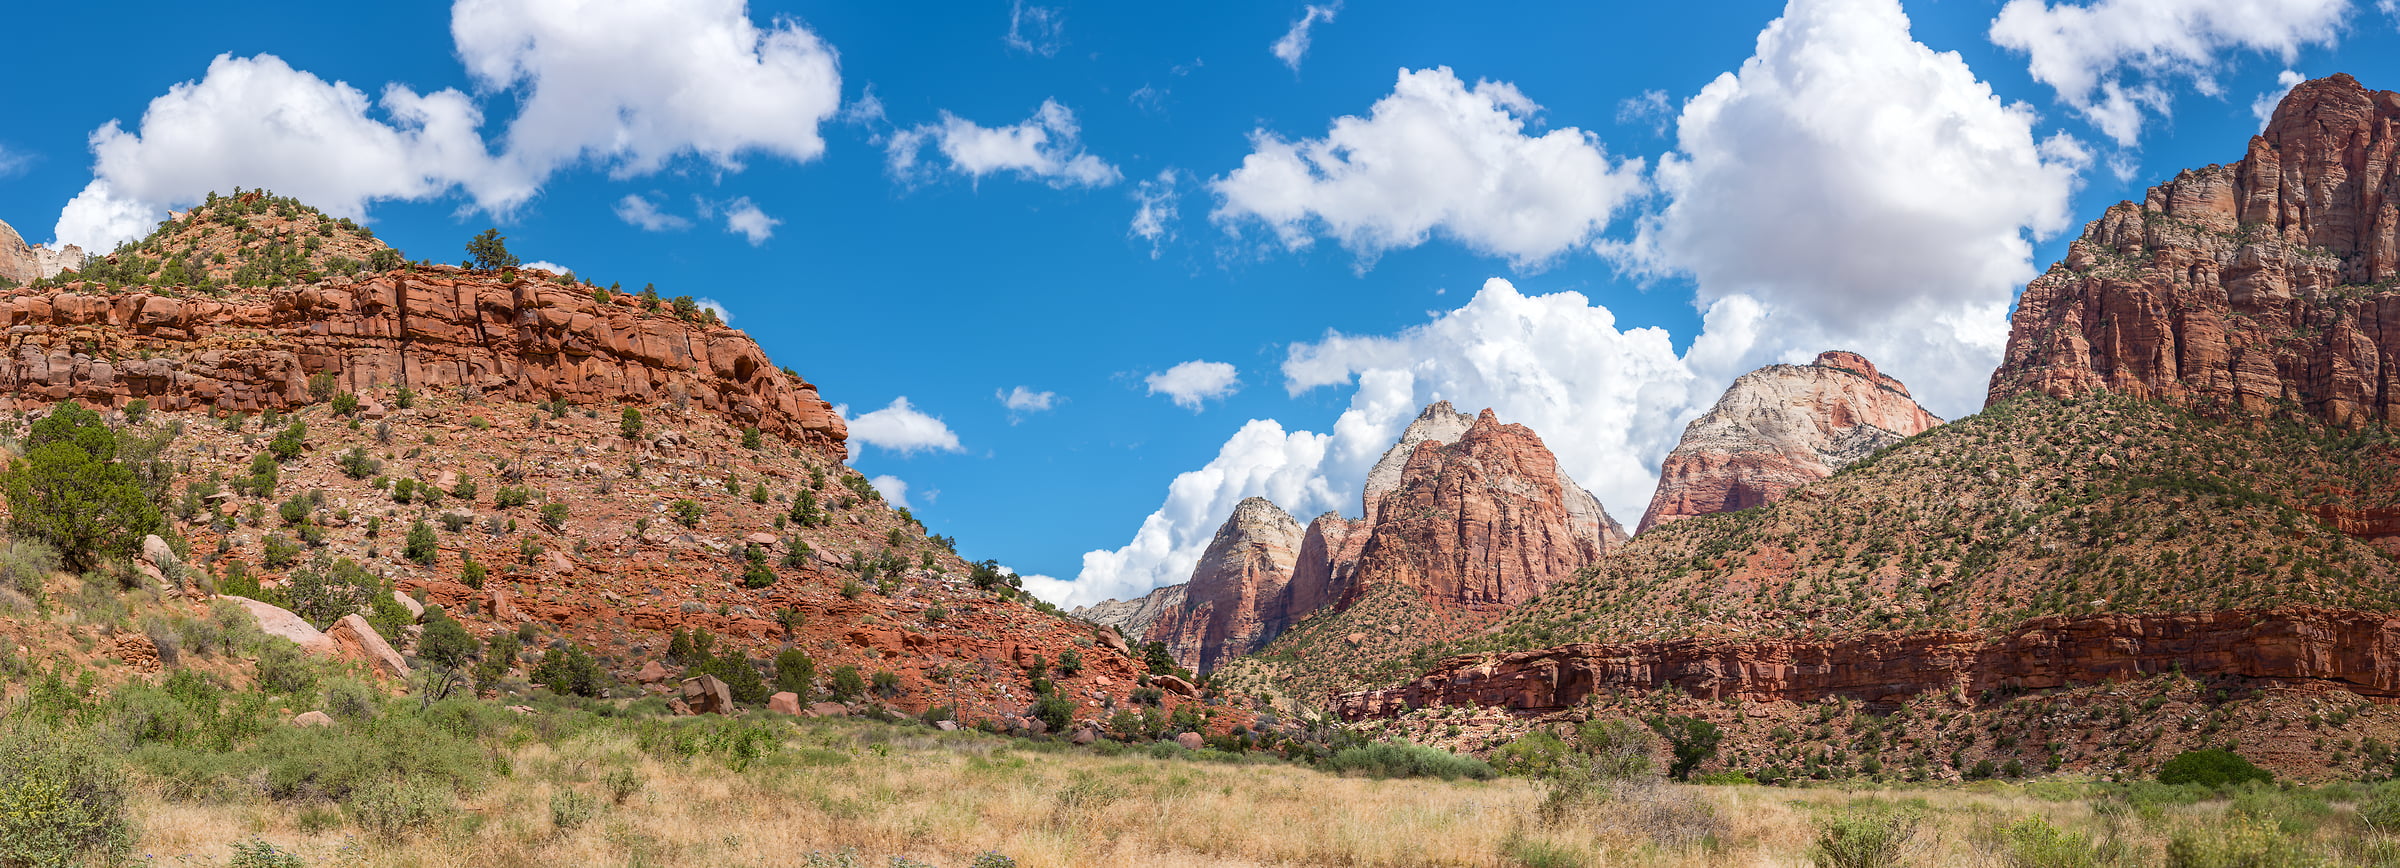 334 megapixels! A very high resolution, large-format VAST photo print from the Zion Human History Museum; landscape photograph created by Jim Tarpo in Human History Museum, Zion National Park, Utah.